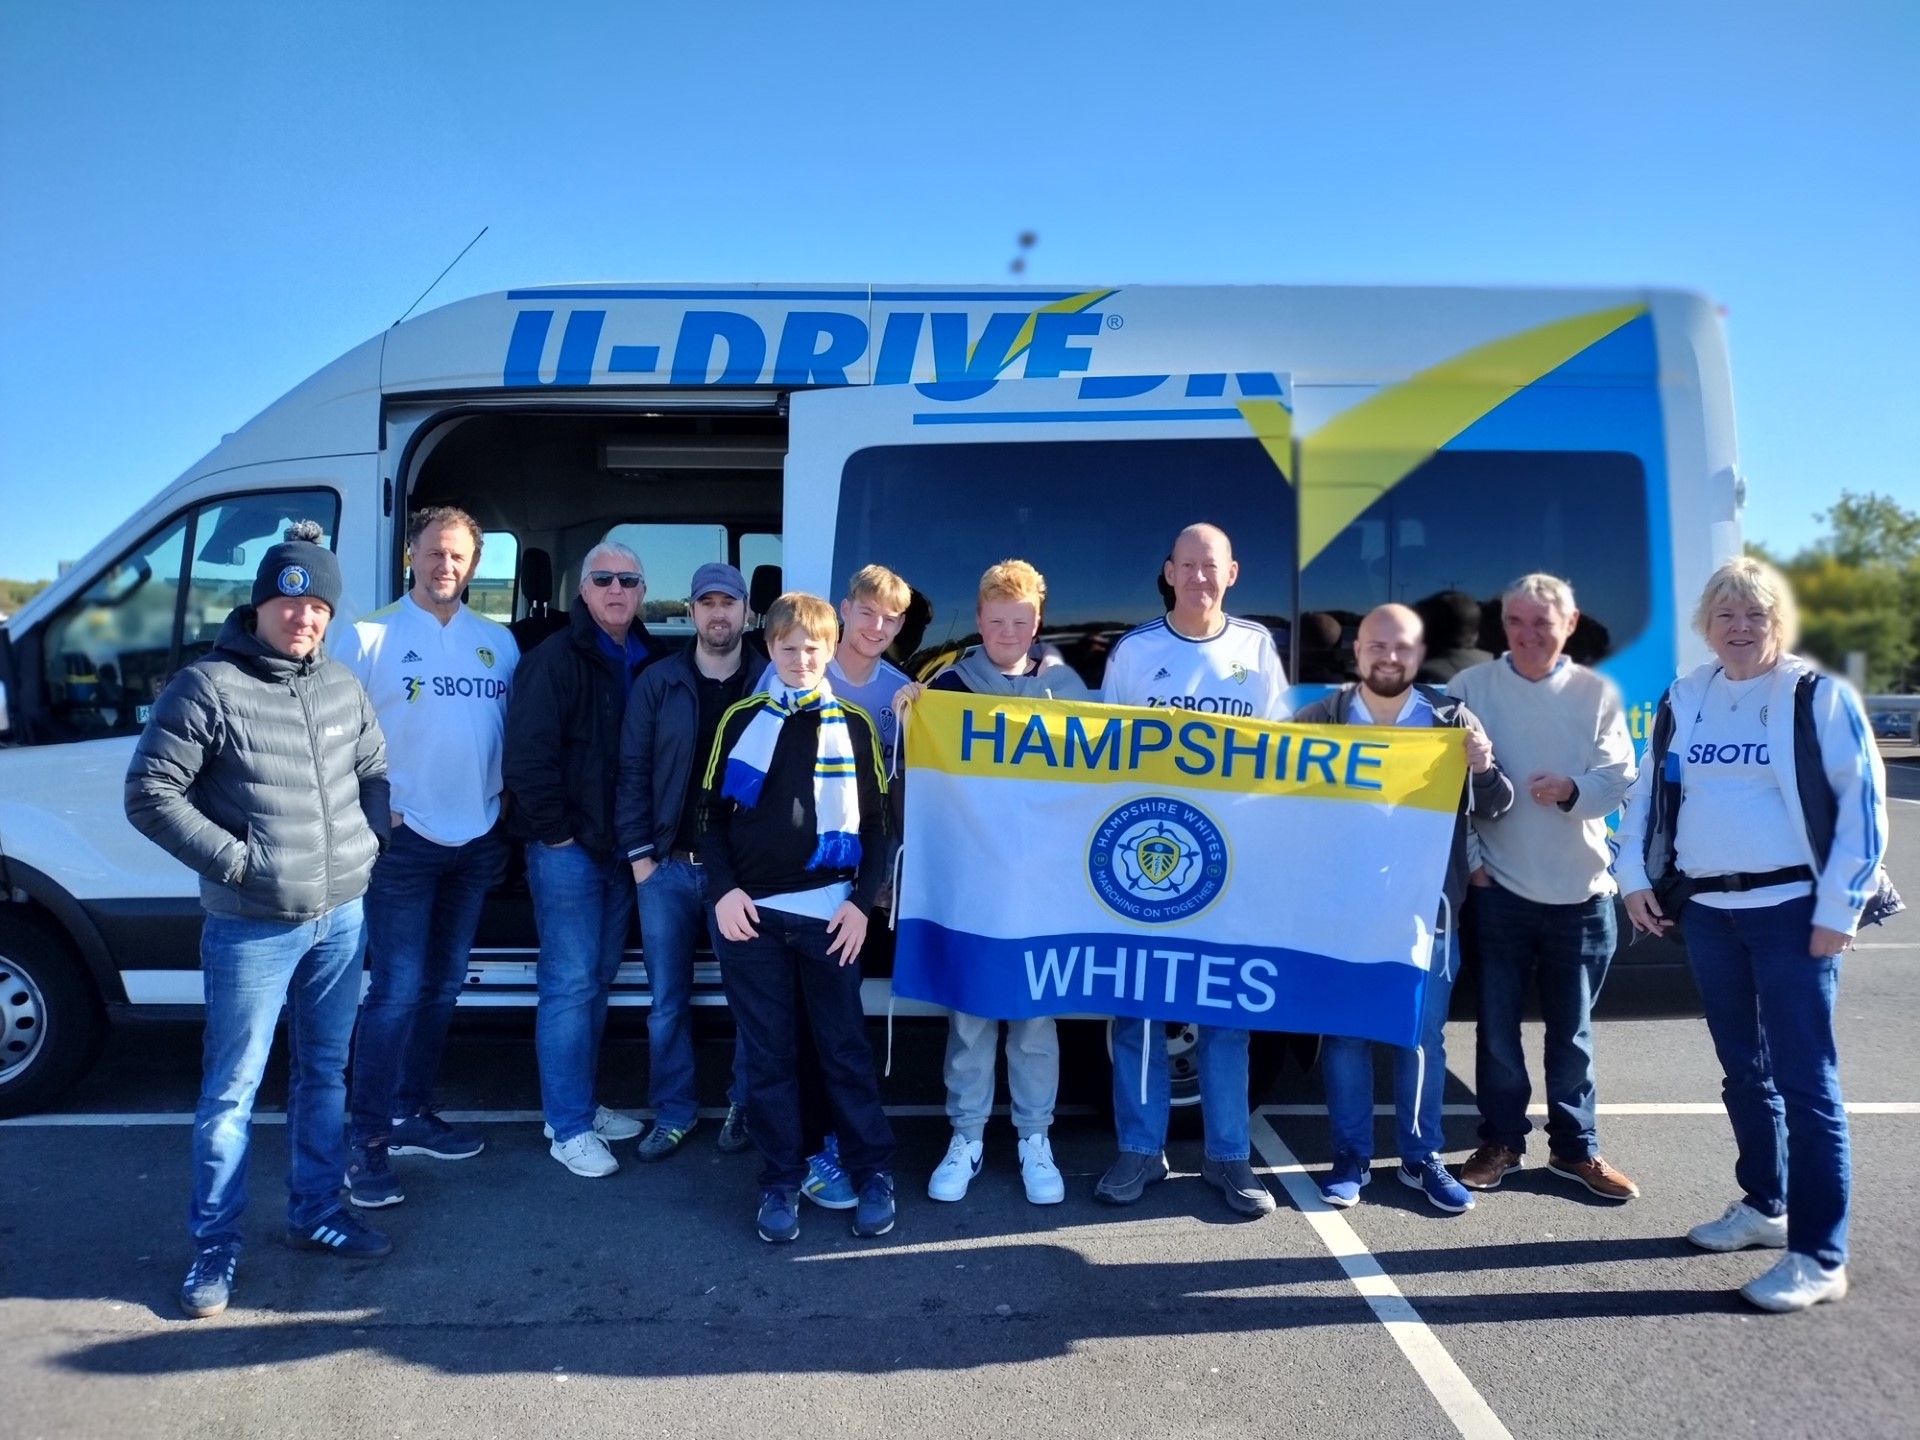 Hampshire Whites gather outside bus on route to Elland Road